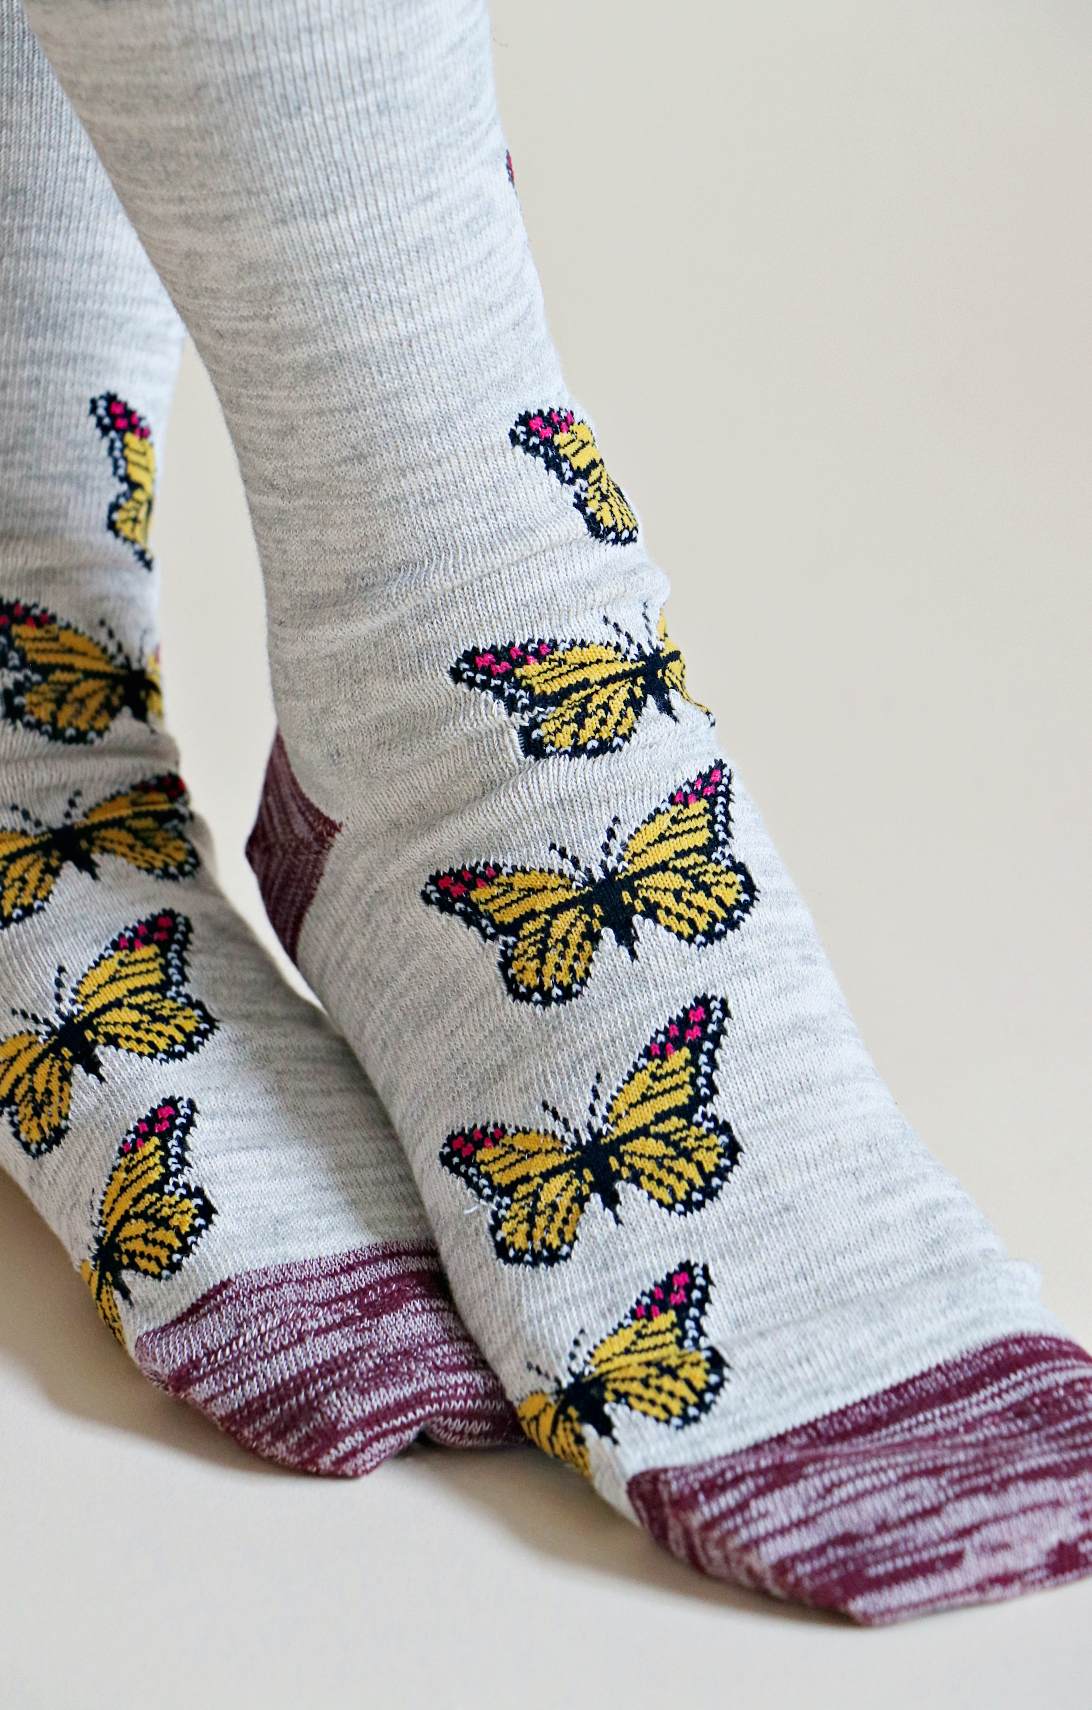 TABBISOCKS brand Replant Pairs "Monarch Butterfly" Organic Cotton Crew Socks with a yellow butterfly pattern with grayish-purple inserts at the mouth, toe and heel in an overall Light Grey color. The socks have a yellow butterfly pattern with grayish-purple inserts at the mouth, toe, and heel.